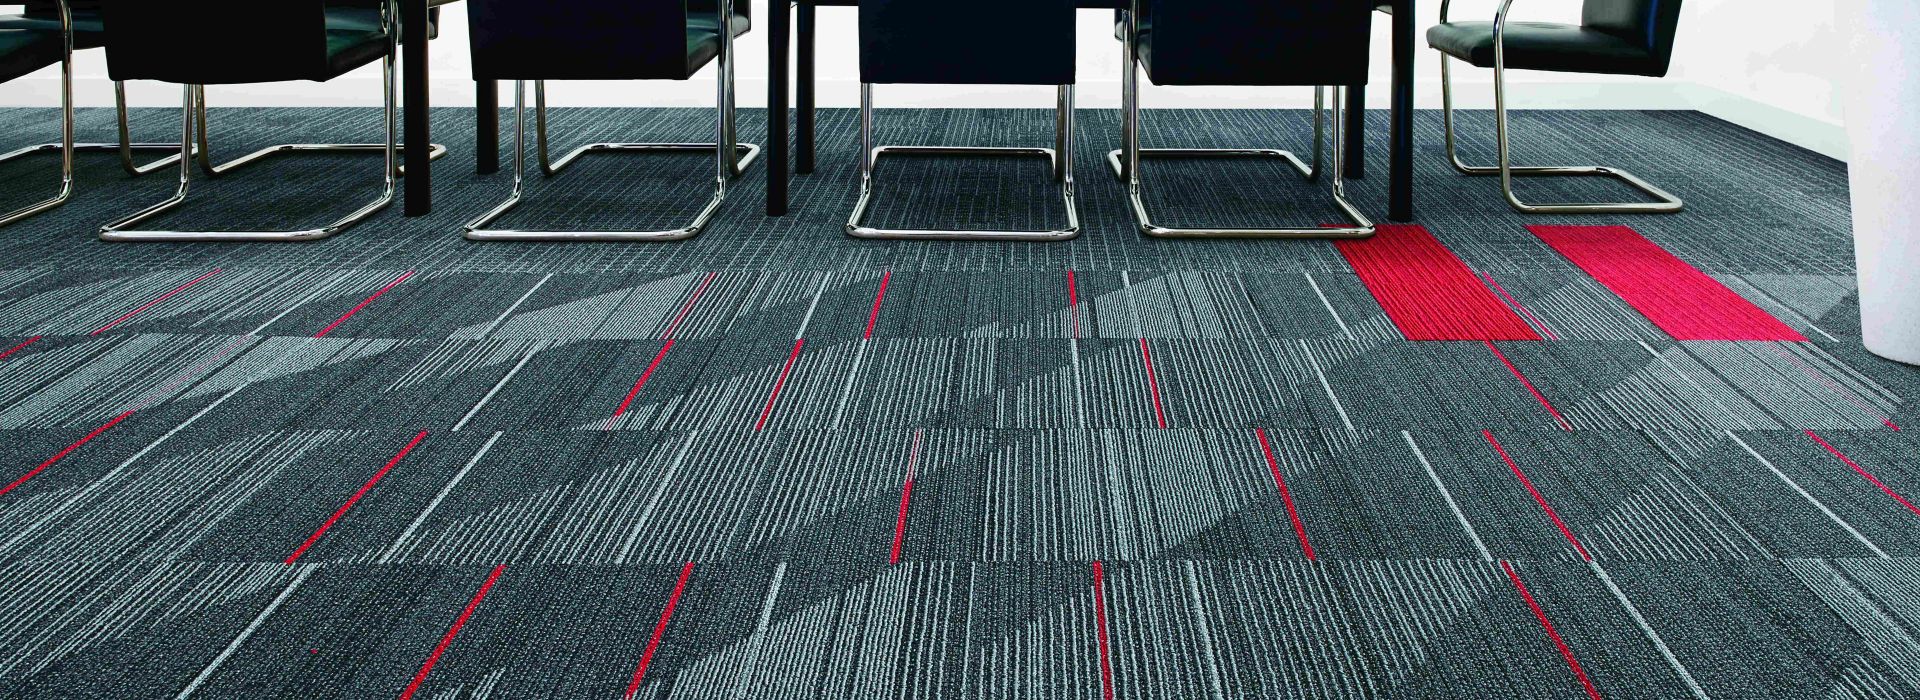 Interface CT111 and On Line plank carpet tile with Detours carpet tile in meeting room imagen número 1